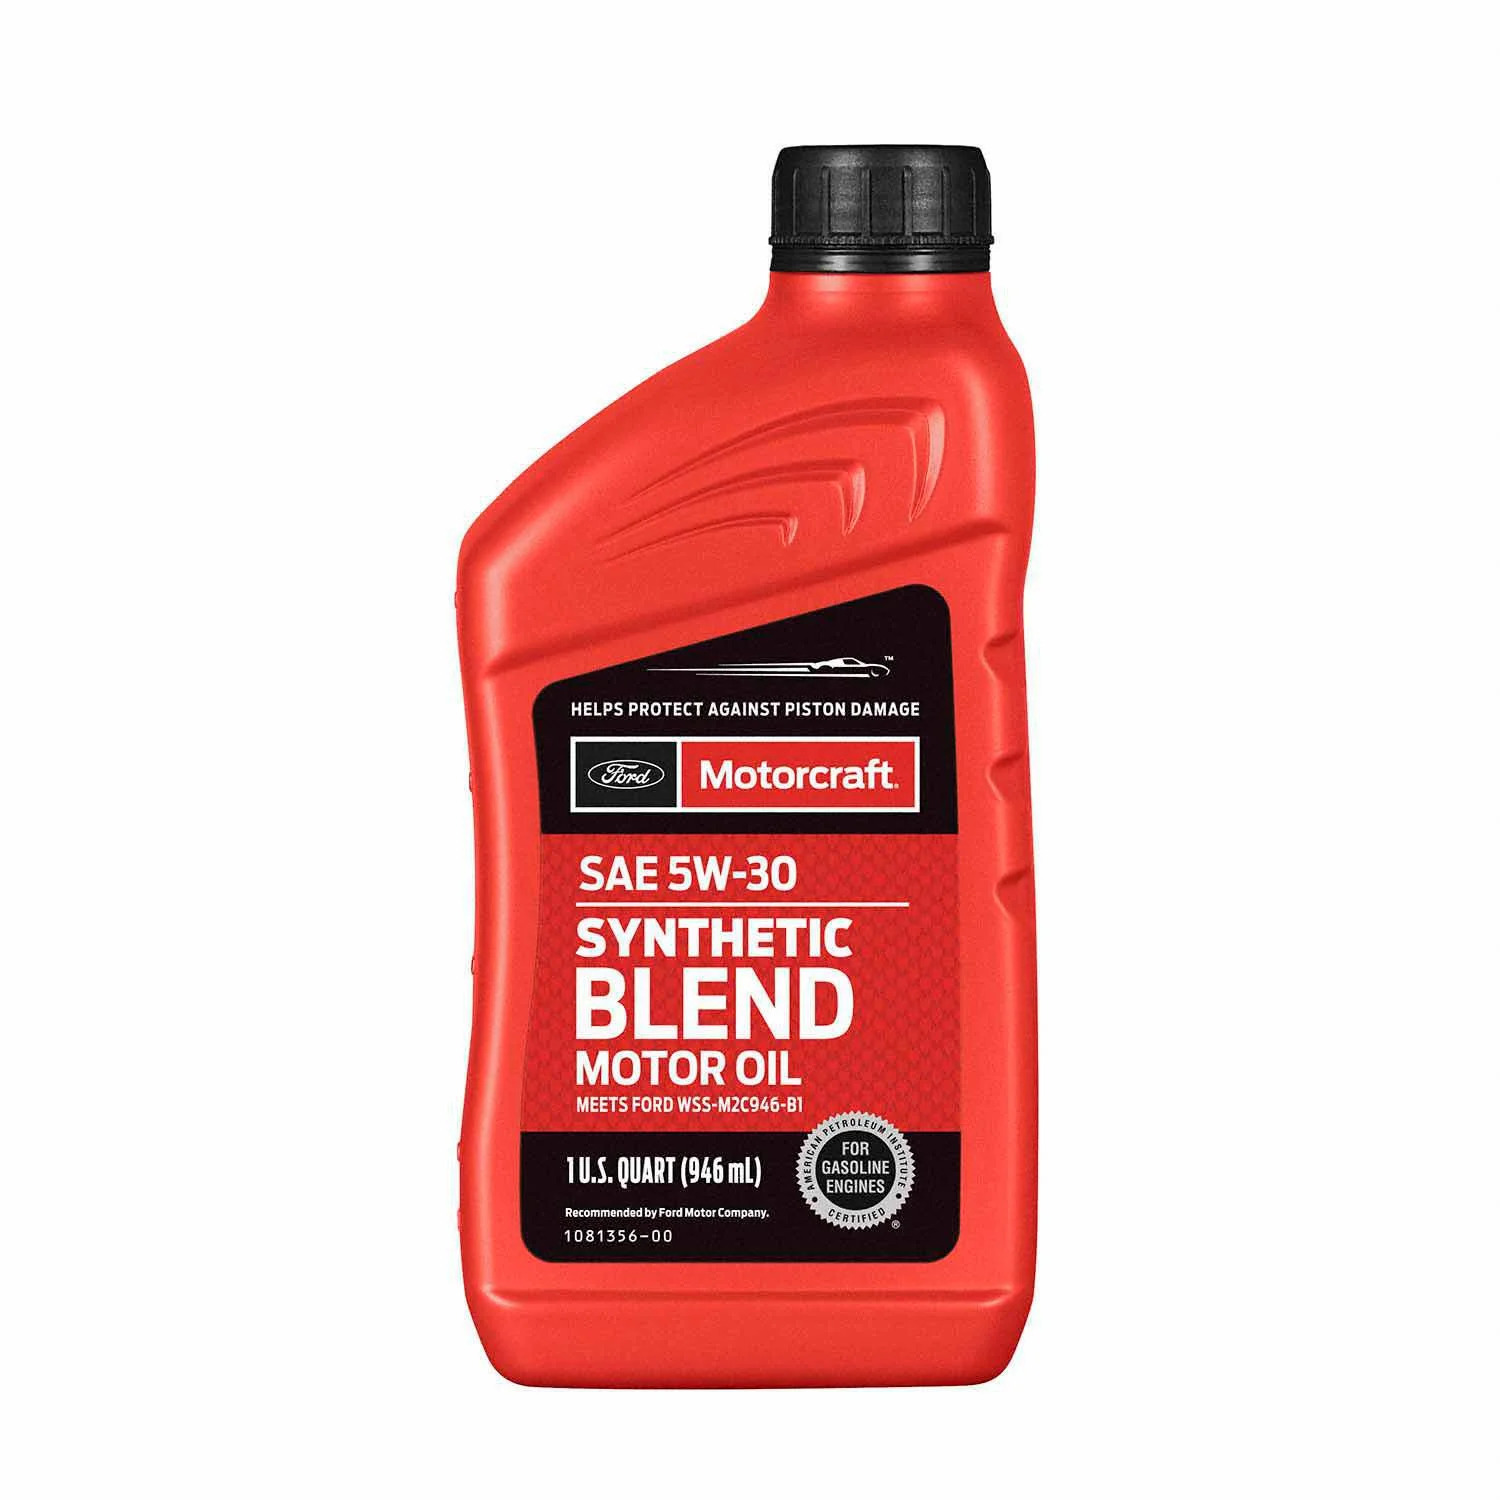 Synthetic Blend Motor Oil, 5W-30 - the Original Equipment Oil Used in Many New F